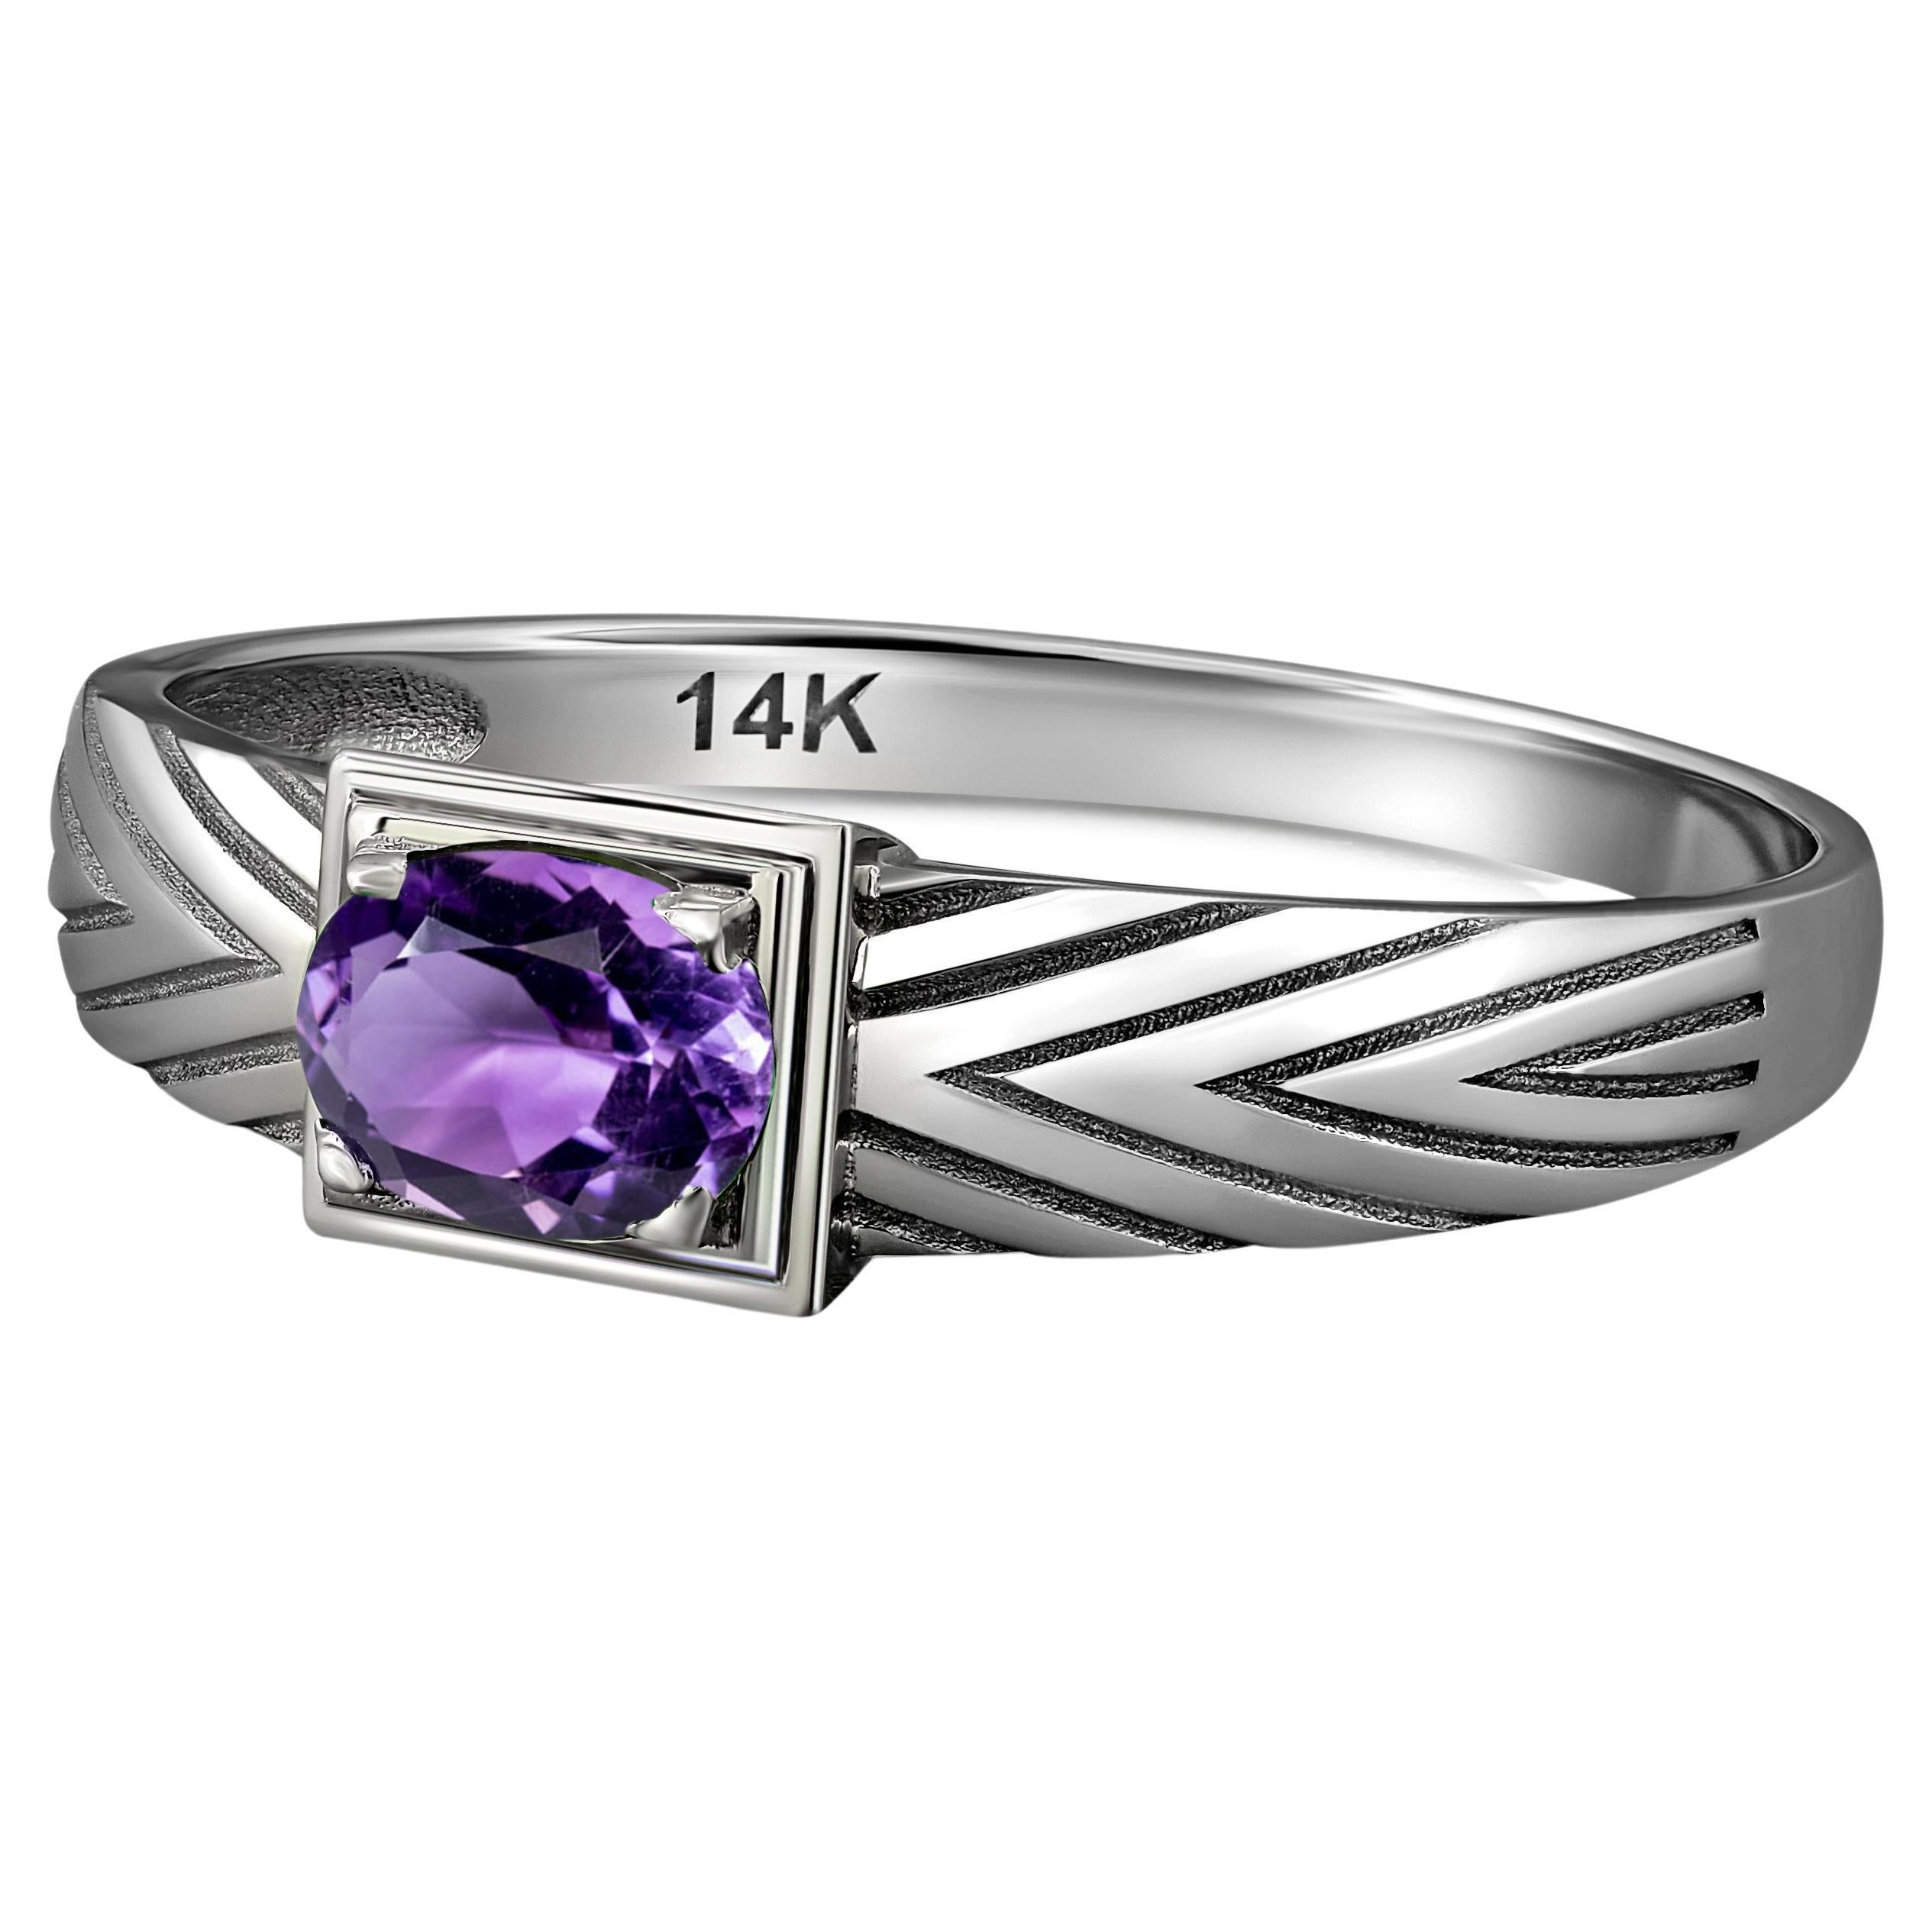 14K Gold Mens Ring with Amethyst. 